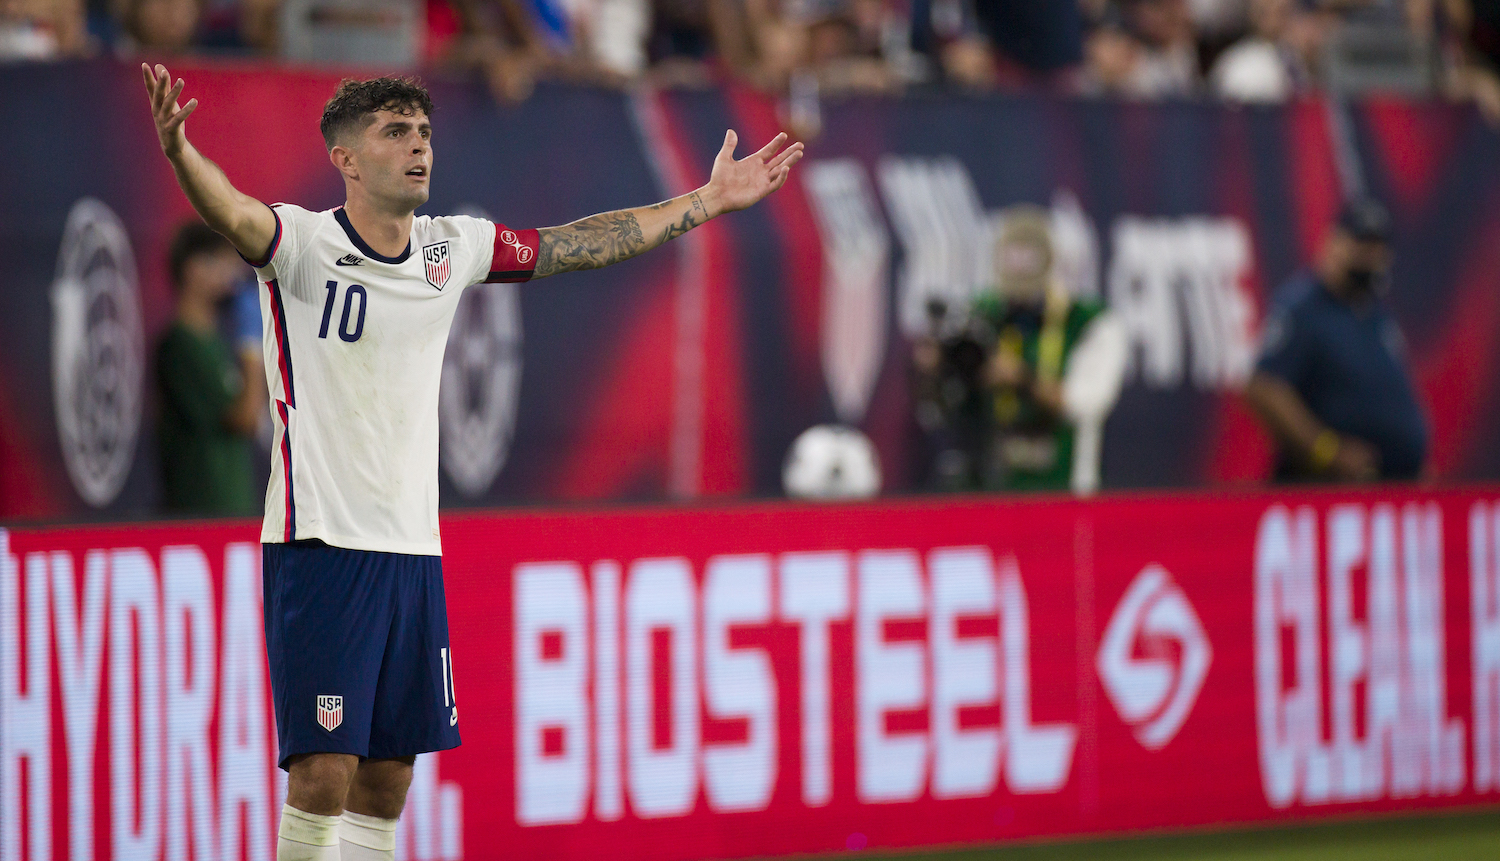 NASHVILLE, TN - SEPTEMBER 05: Christian Pulisic #10 of United States protests a call against him during the second half of their World Cup qualifying match against Canada at Nissan Stadium on September 5, 2021 in Nashville, Tennessee. United States ties tied Canada 1-1. (Photo by Brett Carlsen/Getty Images) *** Local Caption *** Christian Pulisic